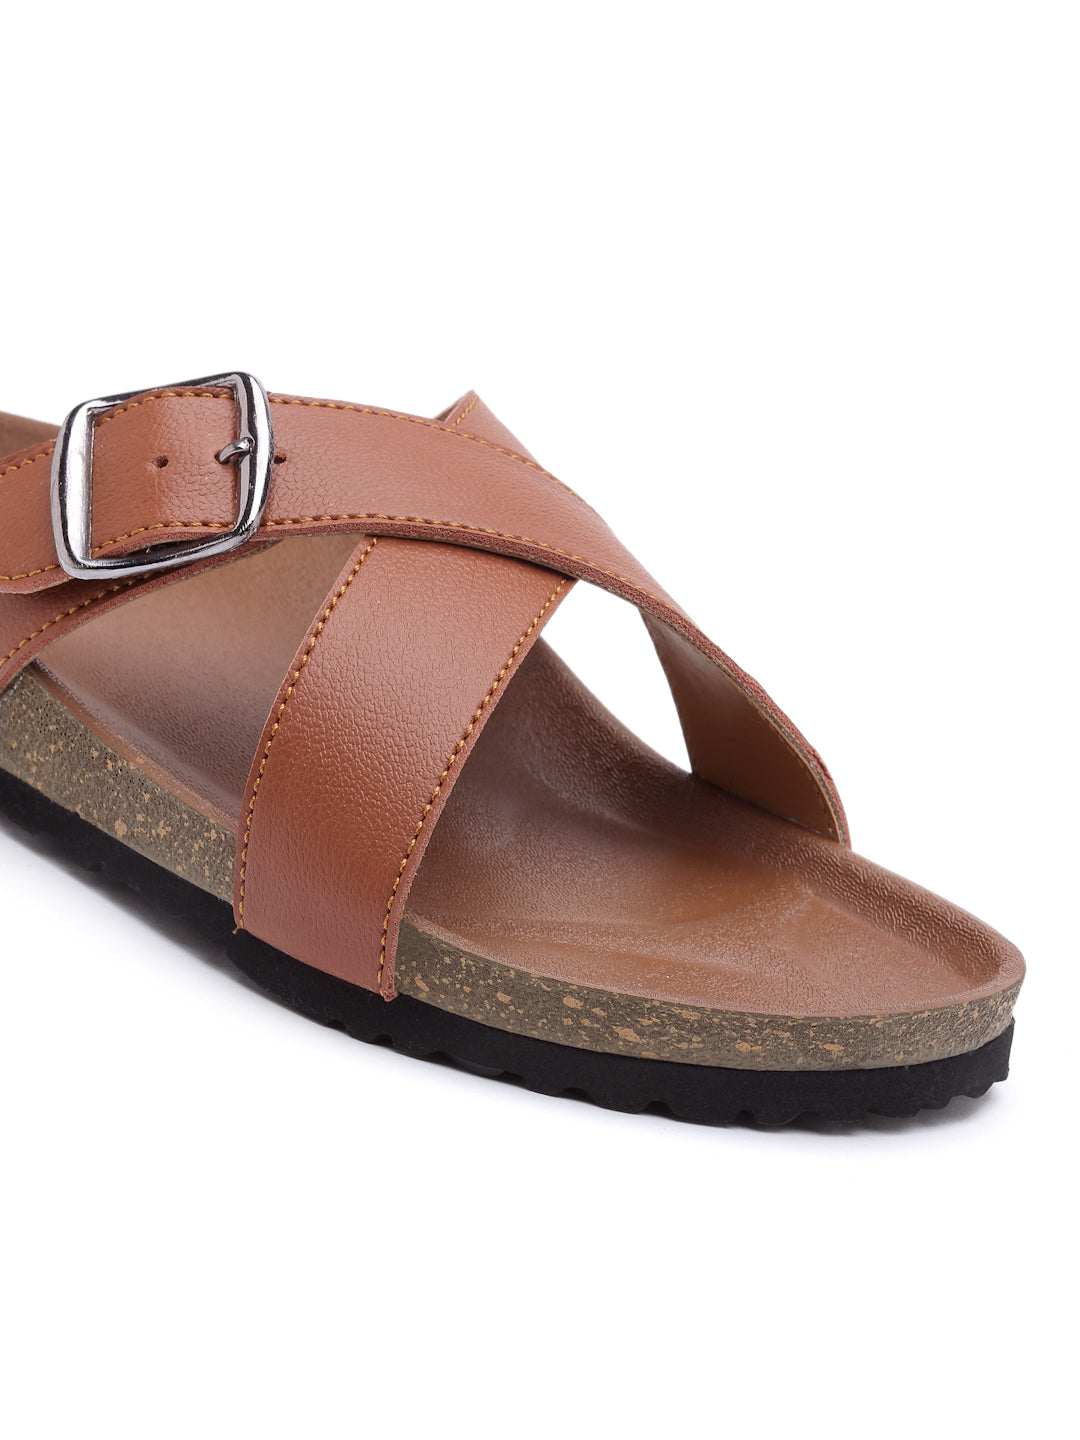 Women's Stylish Light Brown Synthetic Leather Casual Sandal